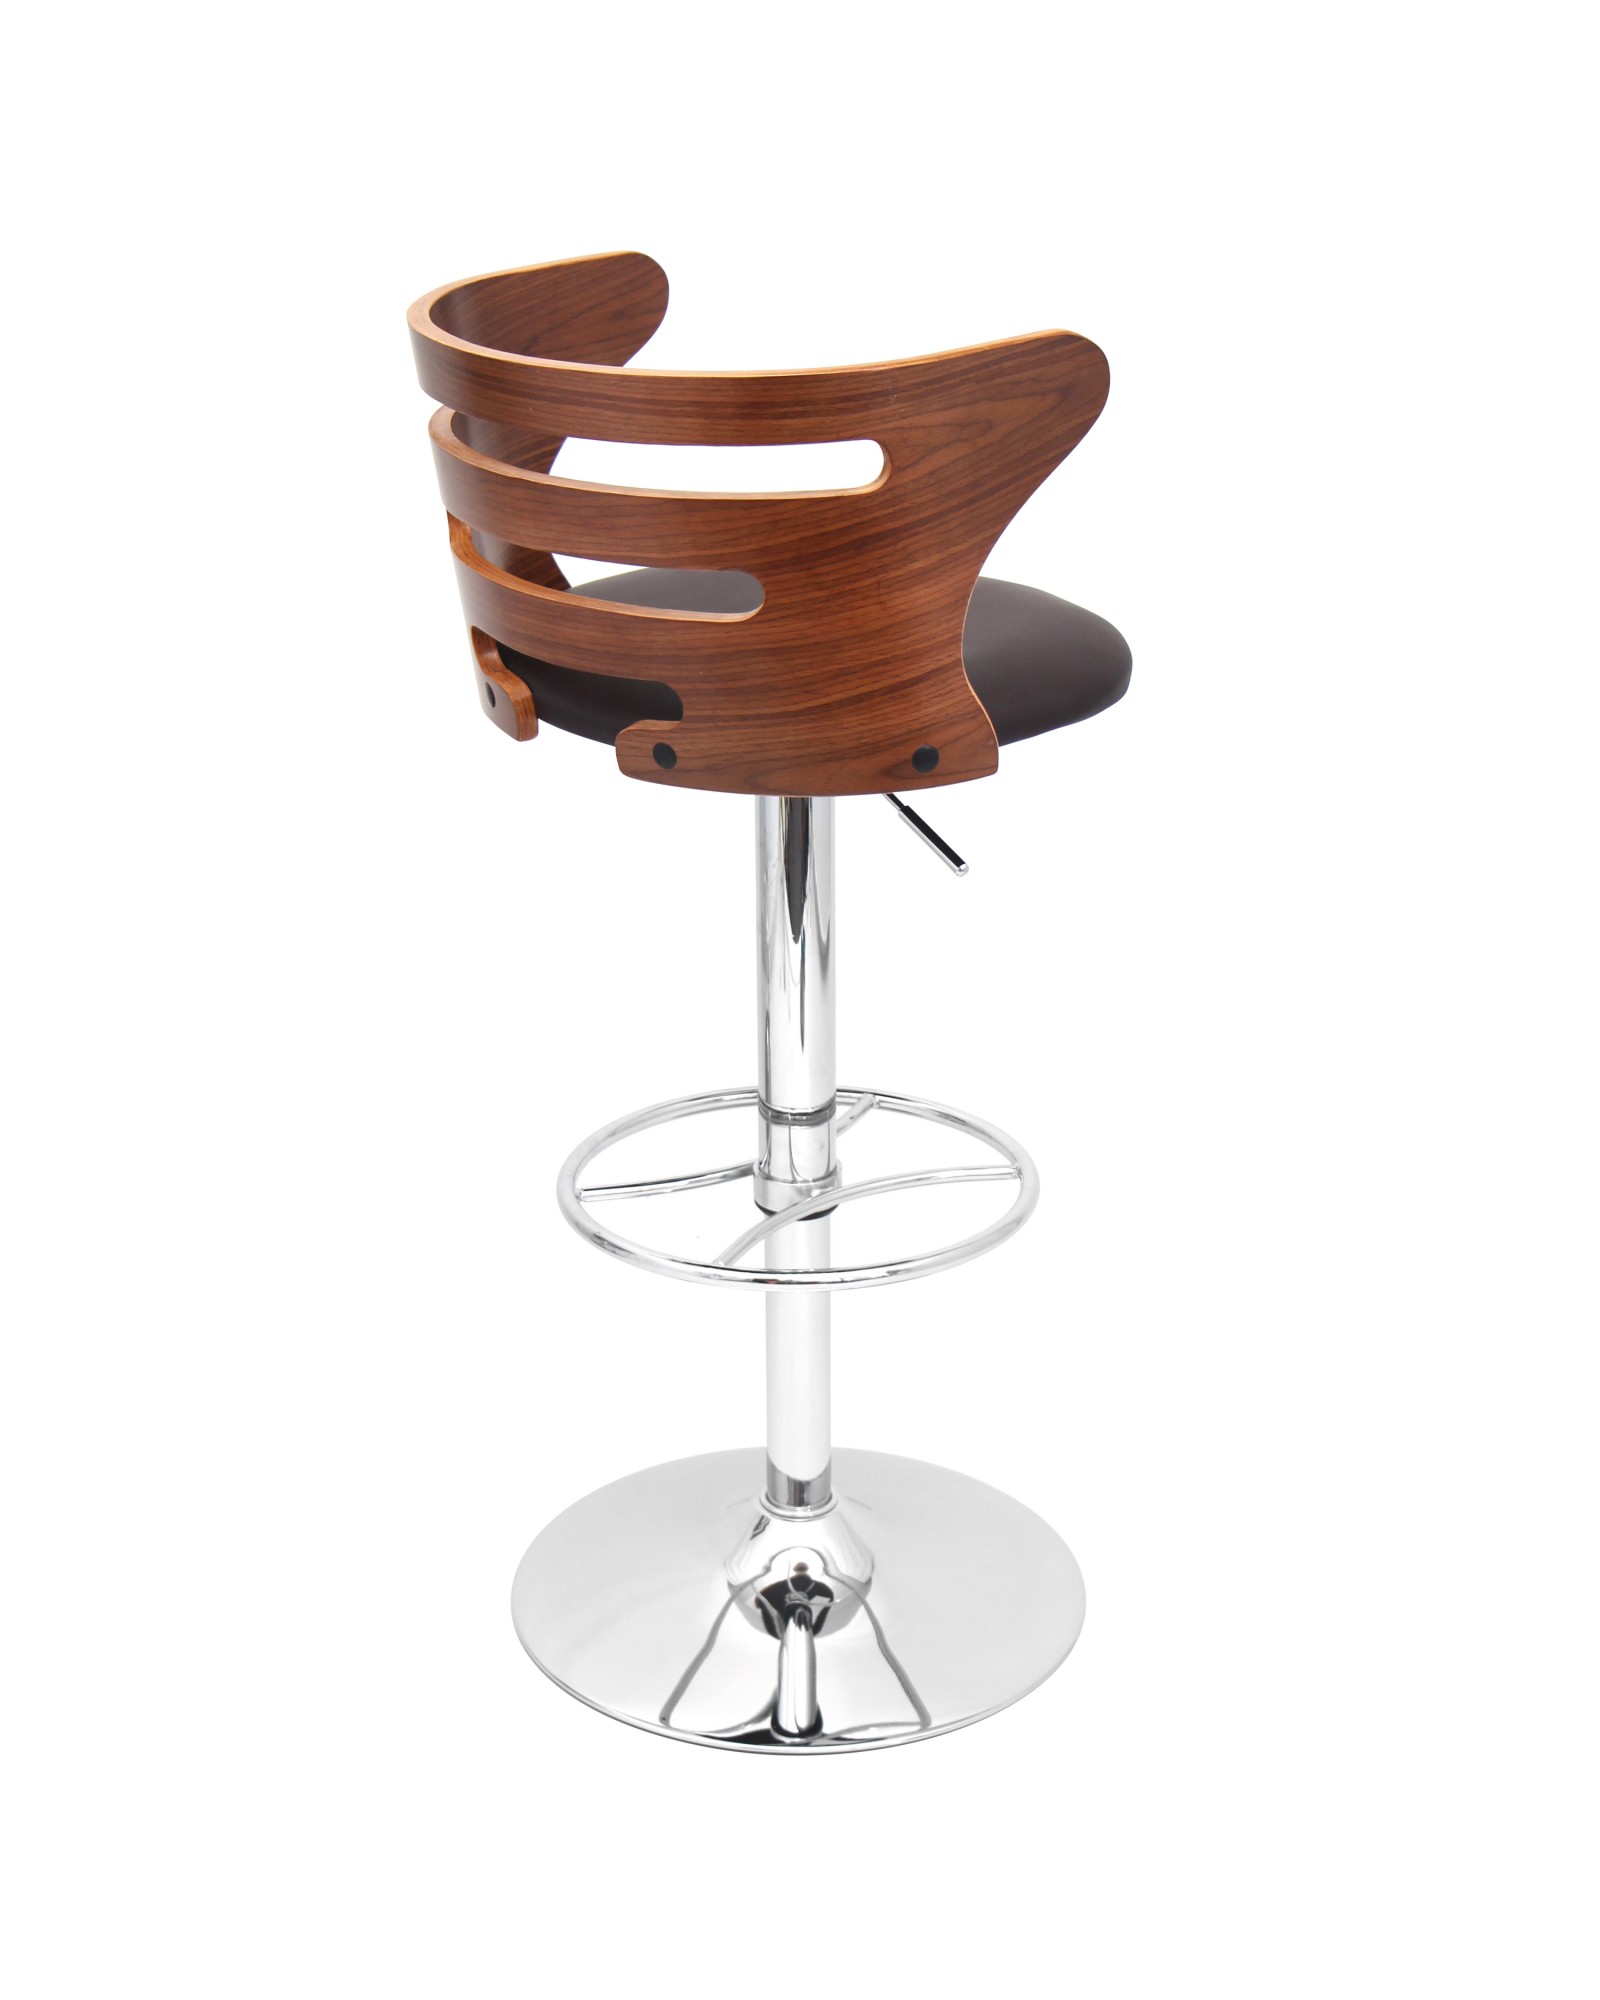 Cosi Mid-Century Modern Adjustable Barstool with Swivel in Walnut and Brown Faux Leather